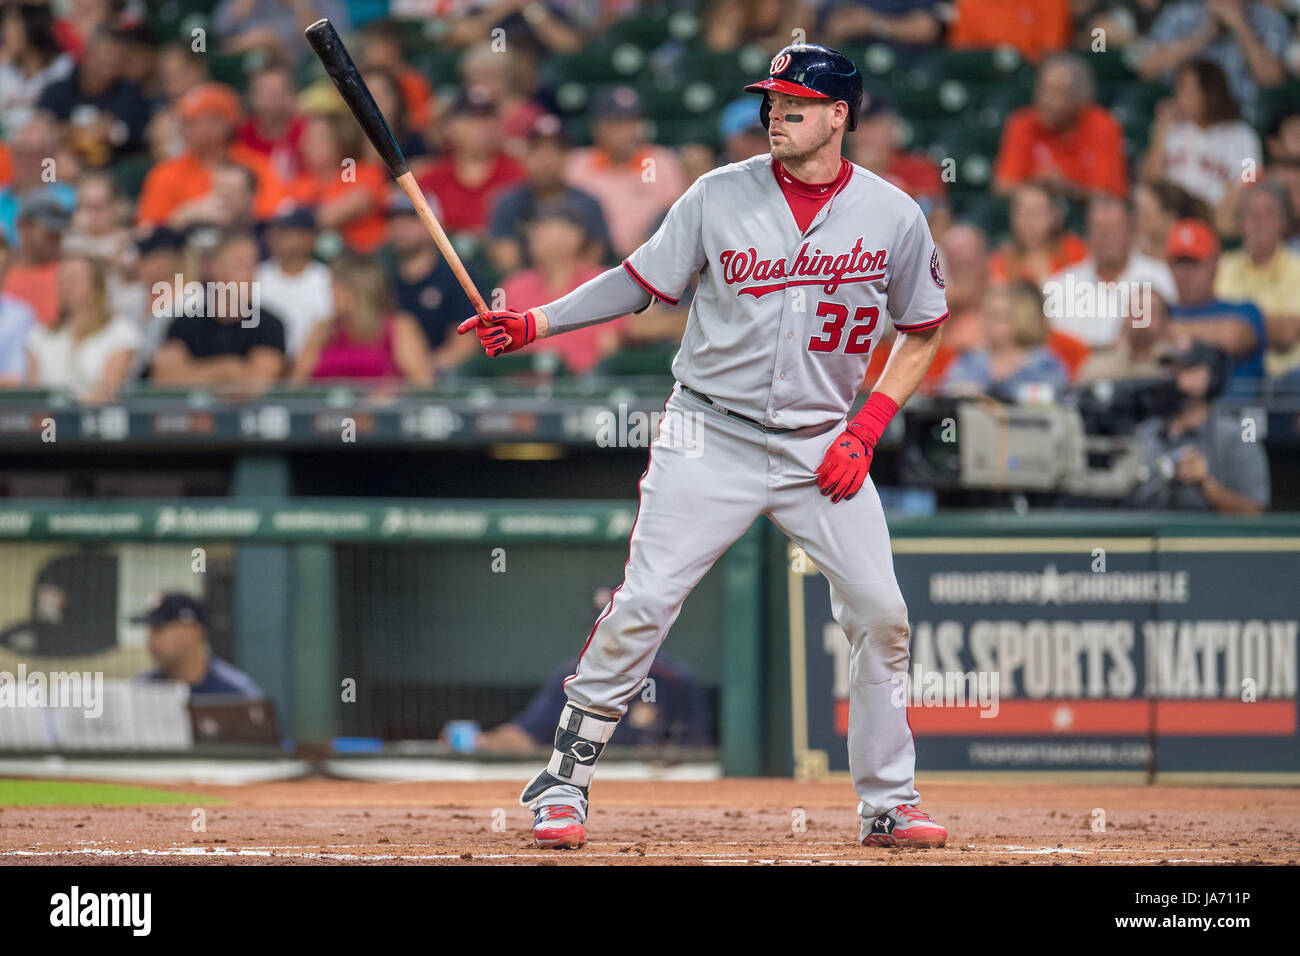 August 23, 2017: Washington Nationals catcher Matt Wieters (32) bats during a Major League Baseball game between the Houston Astros and the Washington Nationals at Minute Maid Park in Houston, TX. The Astros won the game 6-1...Trask Smith/CSM Stock Photo